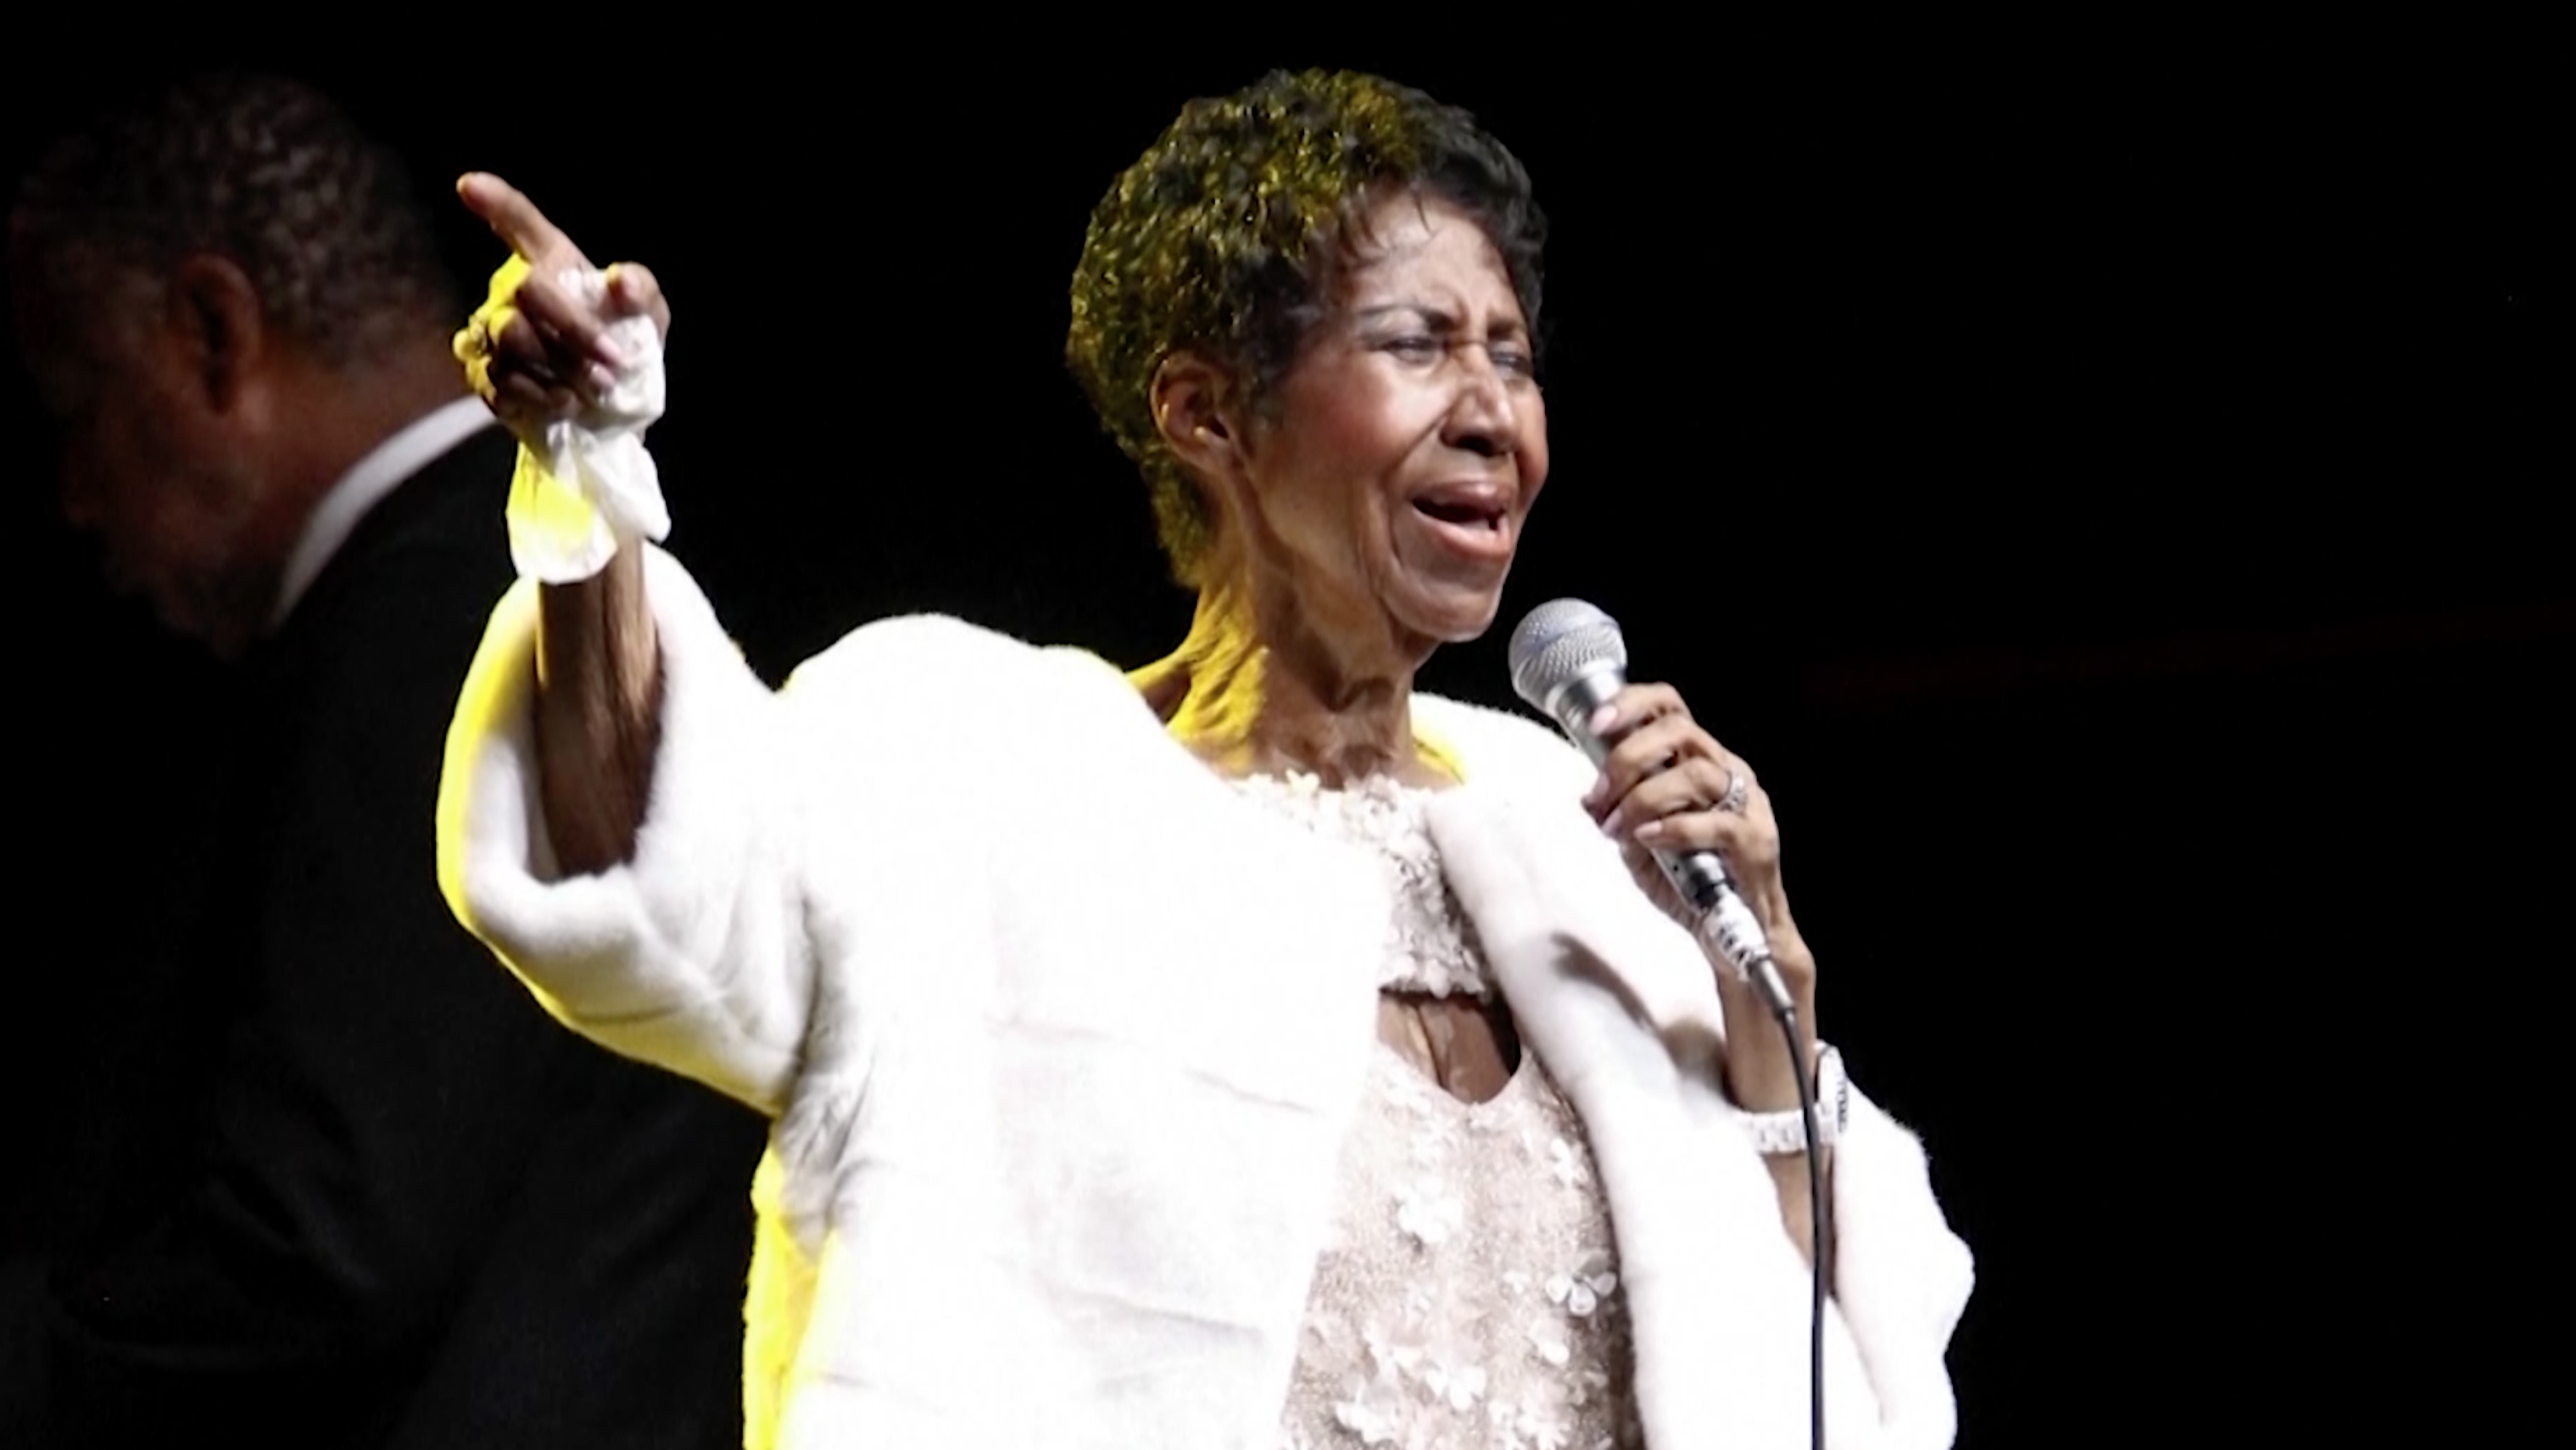 76-Year-Old Queen Of Soul Aretha Franklin Passes Away From Pancreatic Cancer